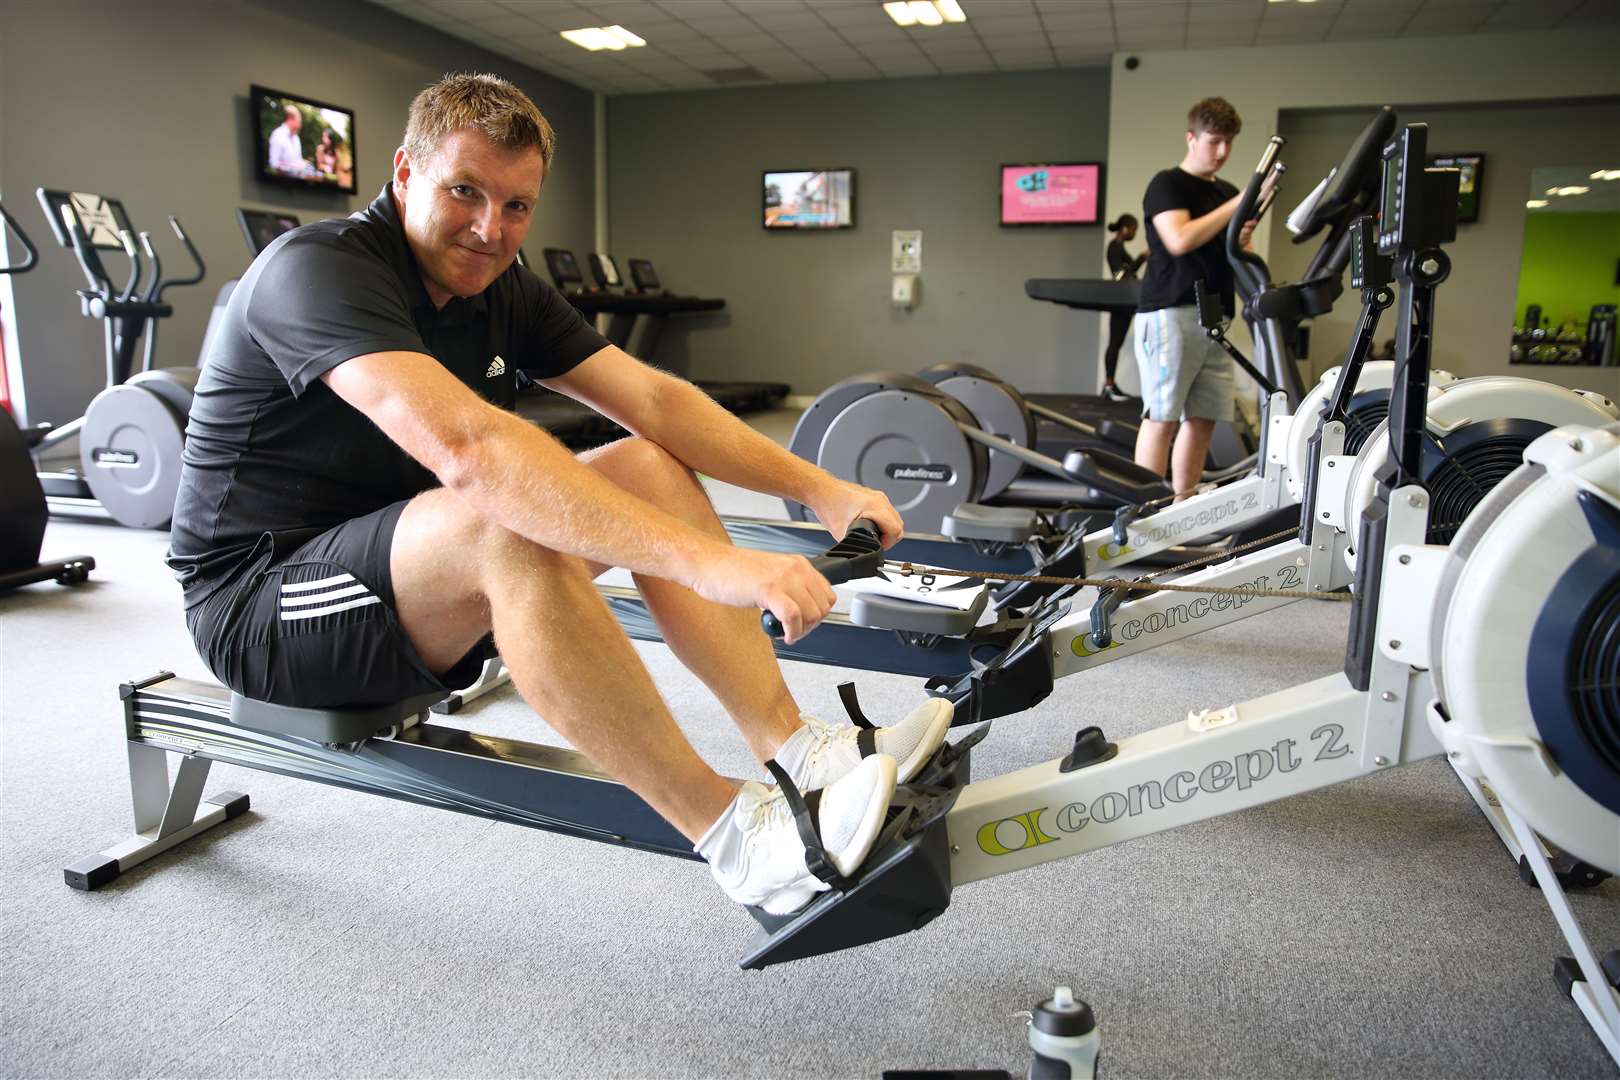 Gym users are looking forward to getting back to Cascades leisure centre